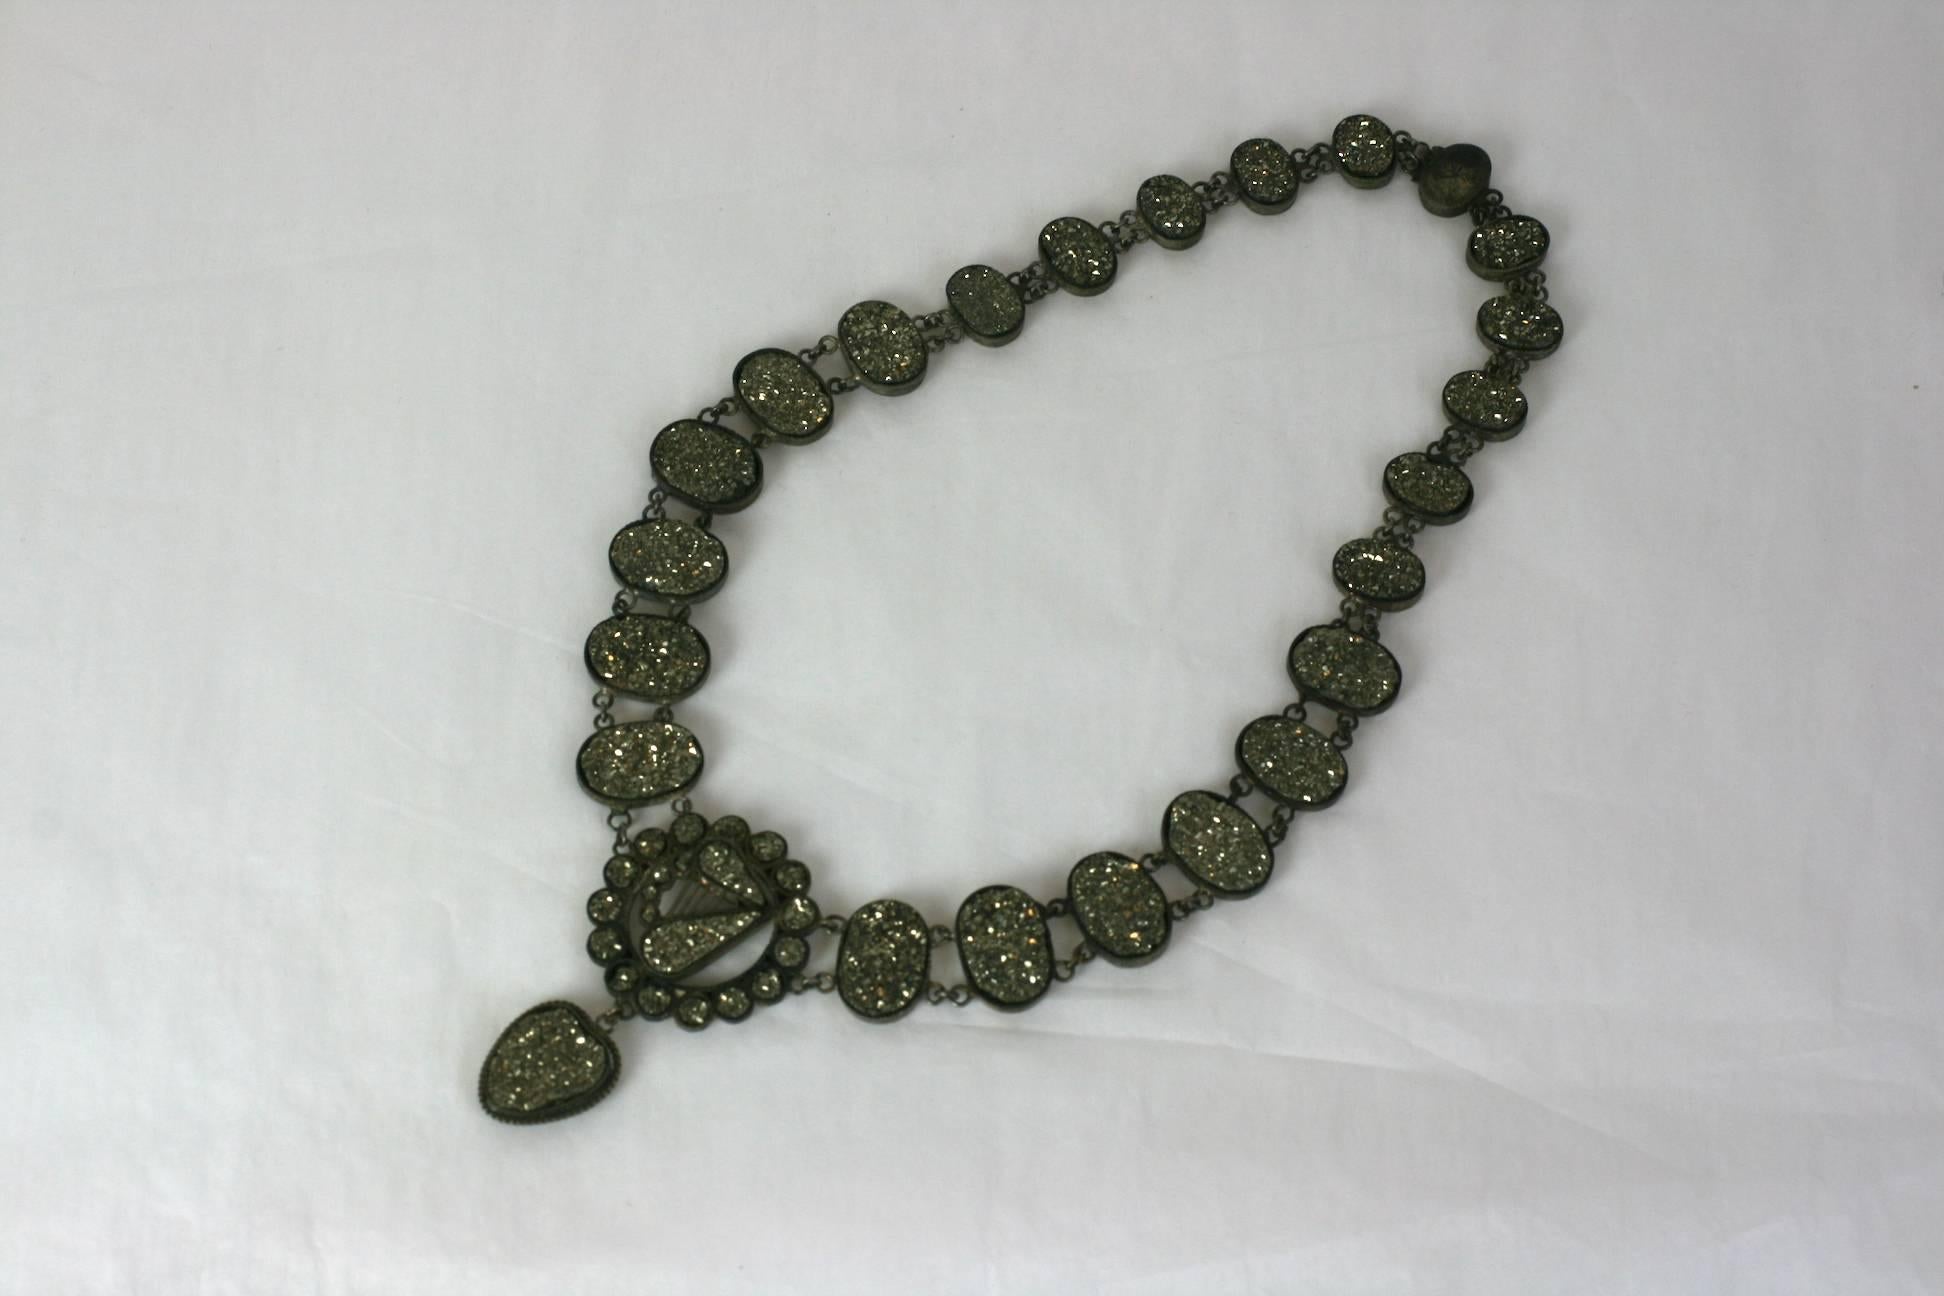 Large and wonderful Victorian Pyrite Necklace from the late 19th Century. Once called 